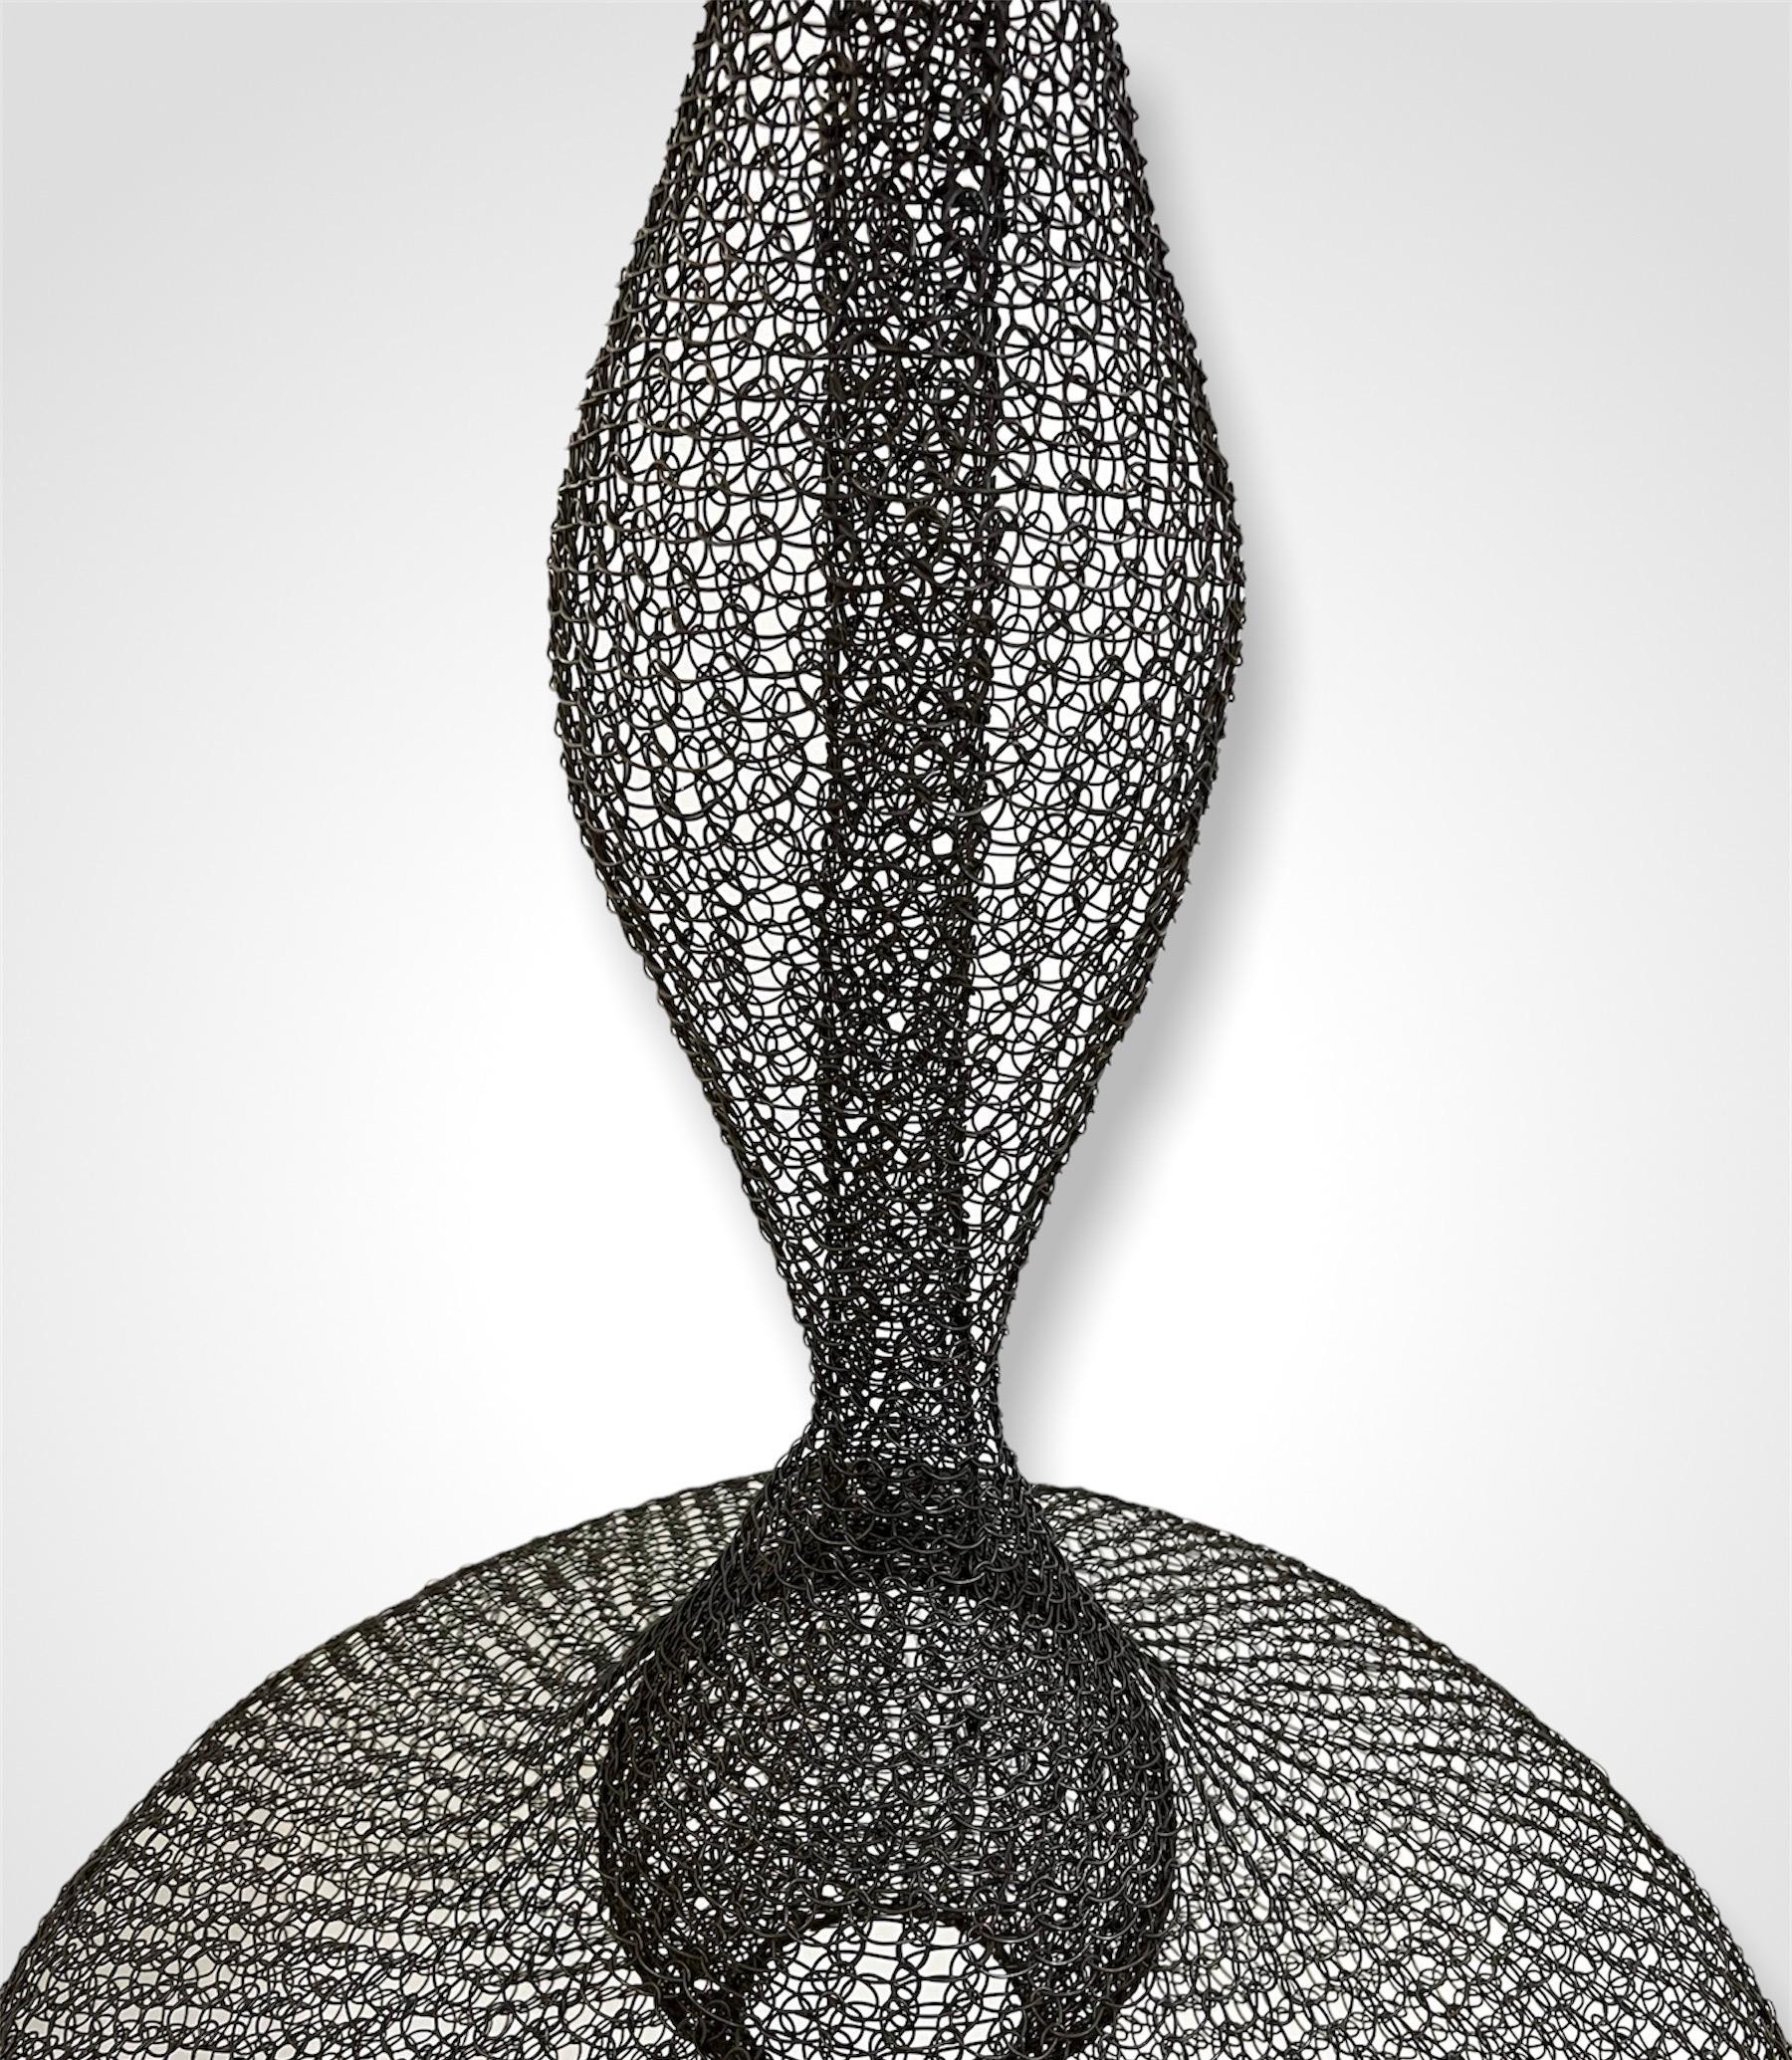 Hand-Woven Organic Woven Mesh Wire Sculpture by Ulrikk Dufosse For Sale